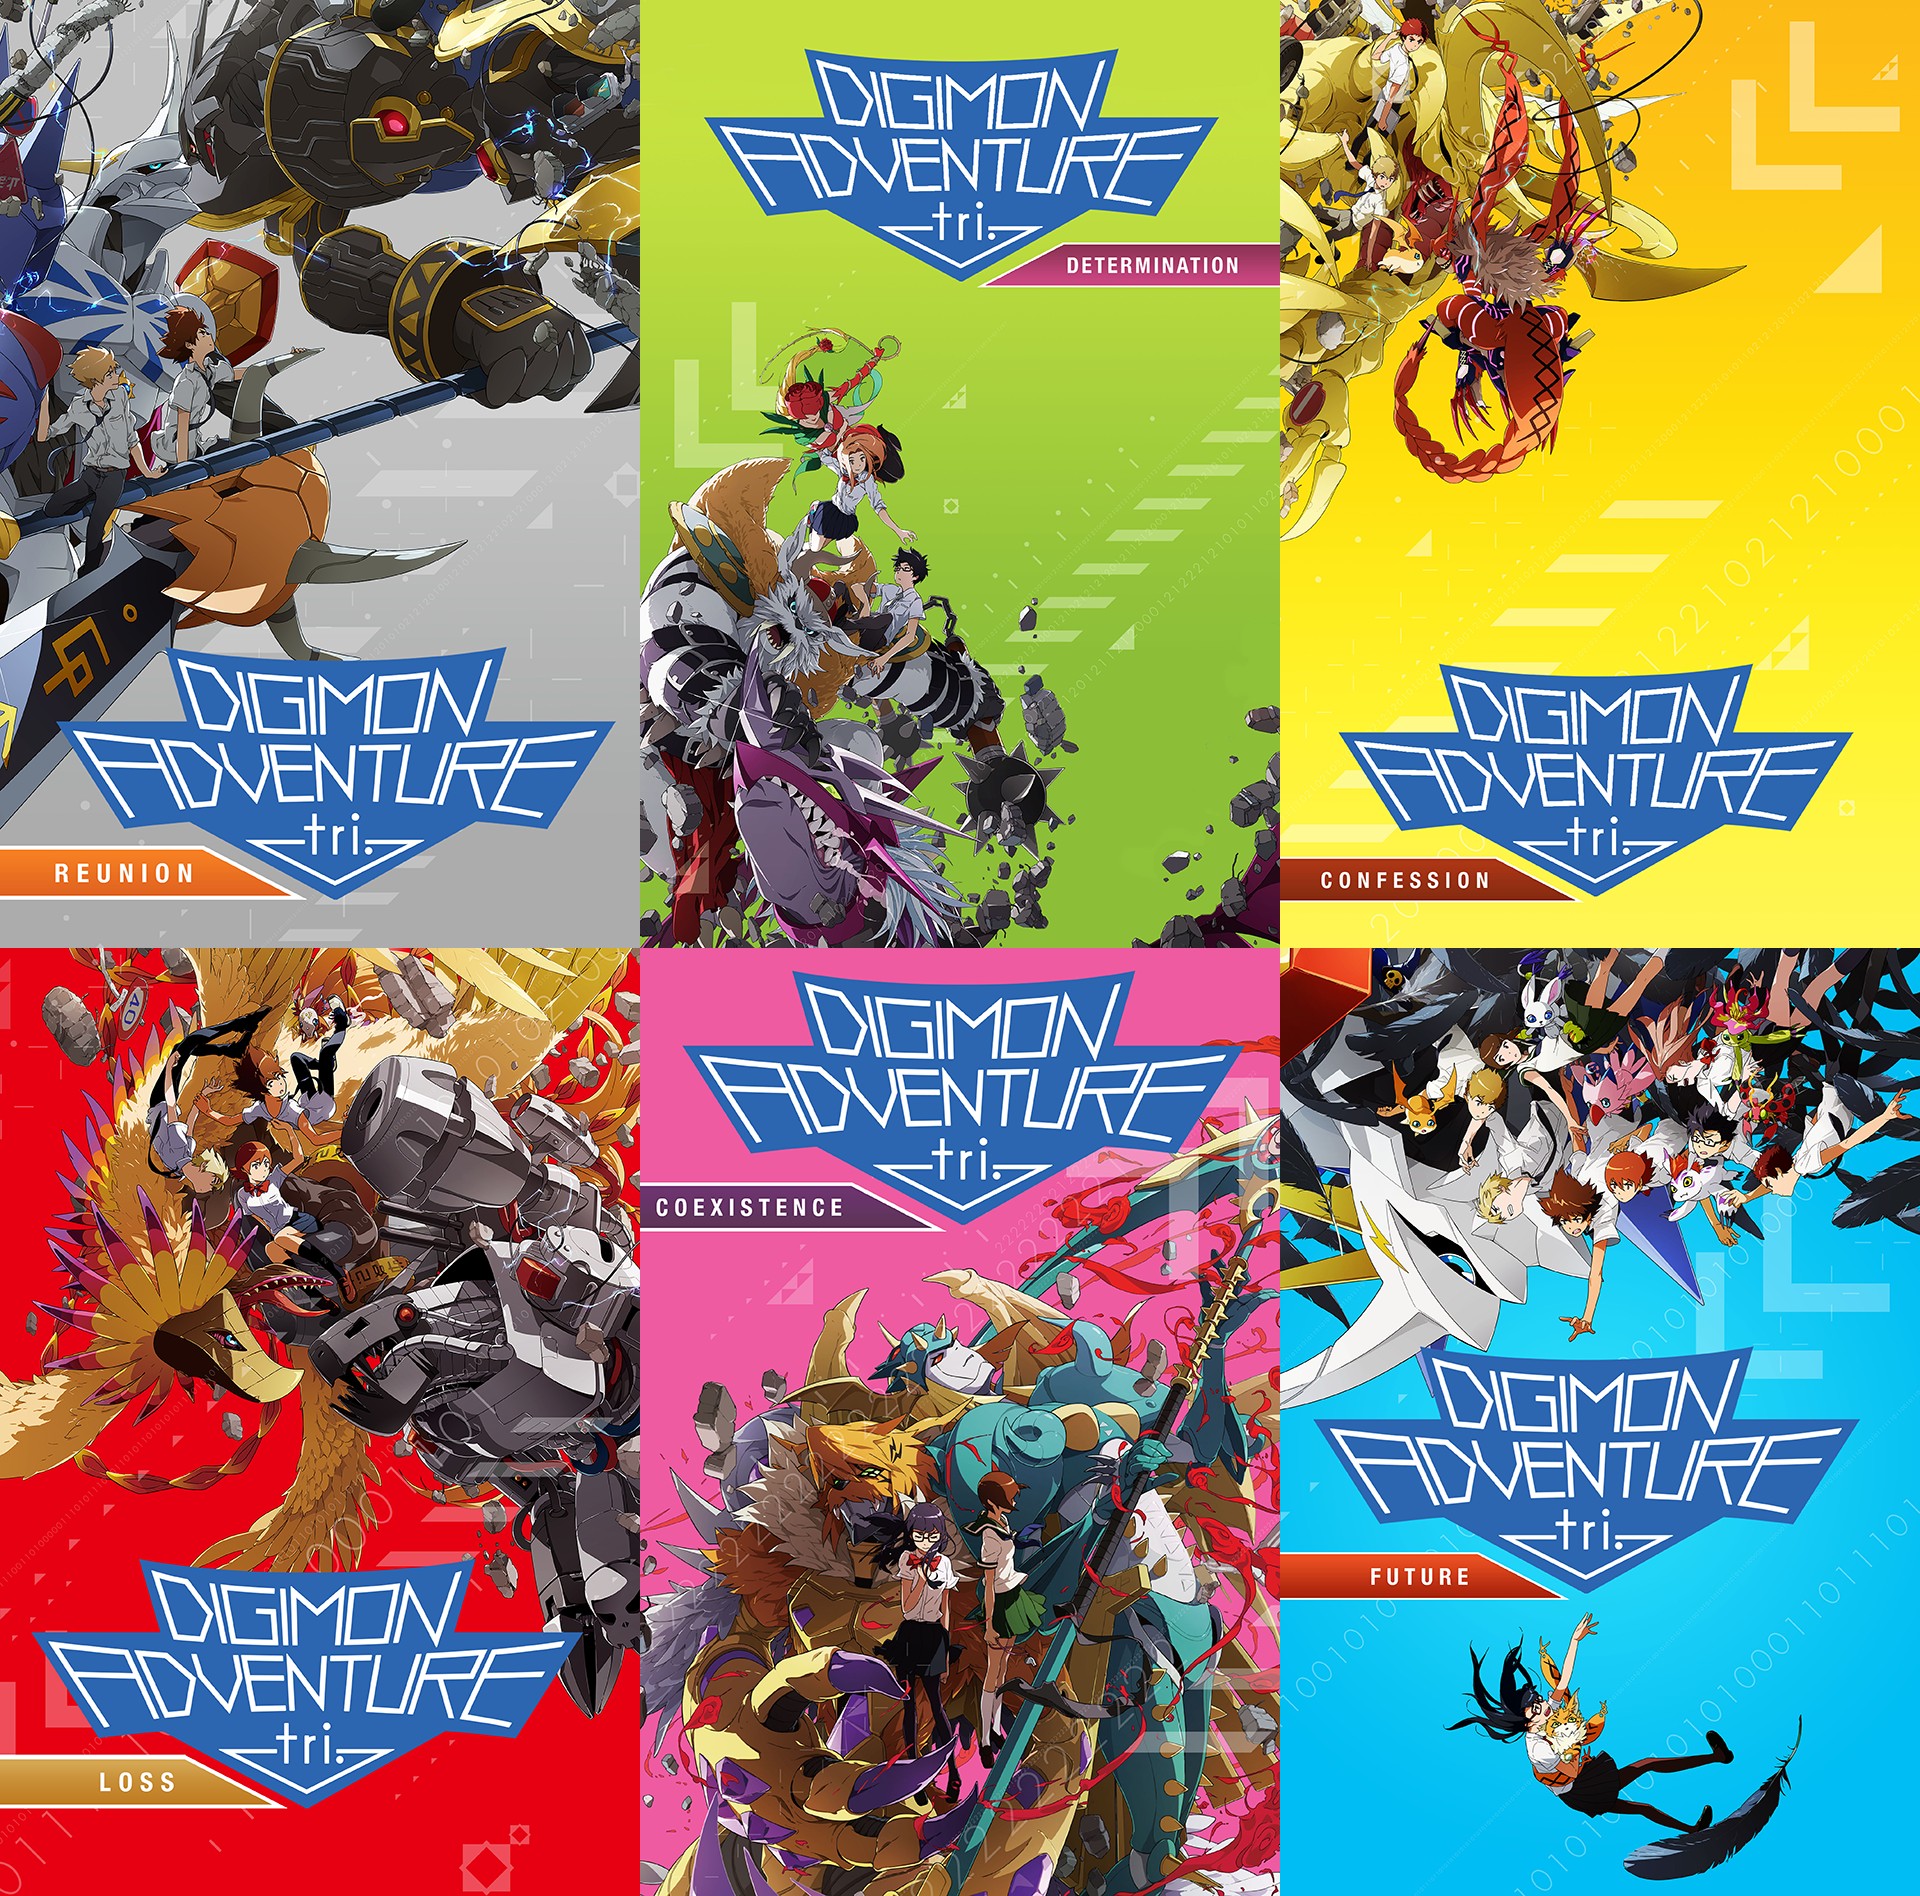 With the Will Digimon Forums, News, Podcast on X: Crunchyroll has  announced Digimon Adventure tri. will be streaming on December 22nd. They  previously streamed a TV episodic version of the films subbed